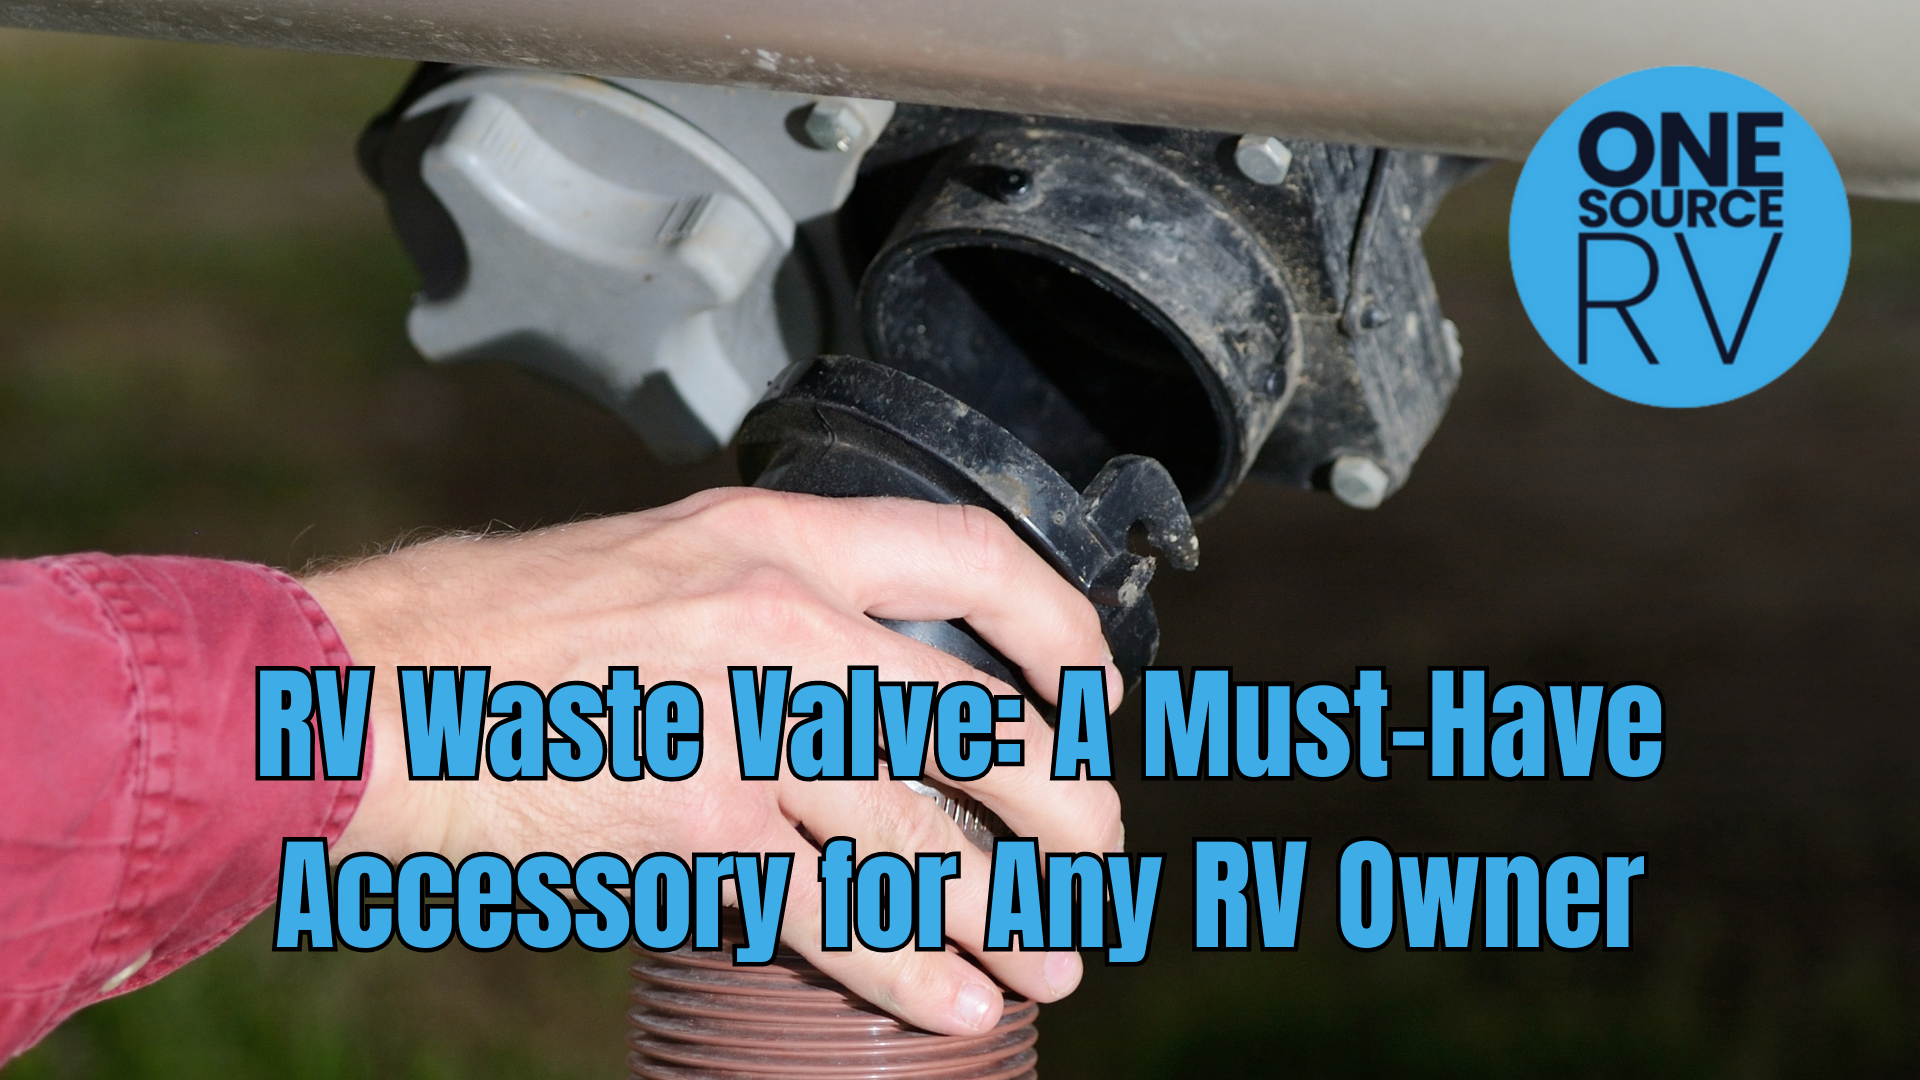 RV Waste Valve: A Must-Have Accessory for Any RV Owner